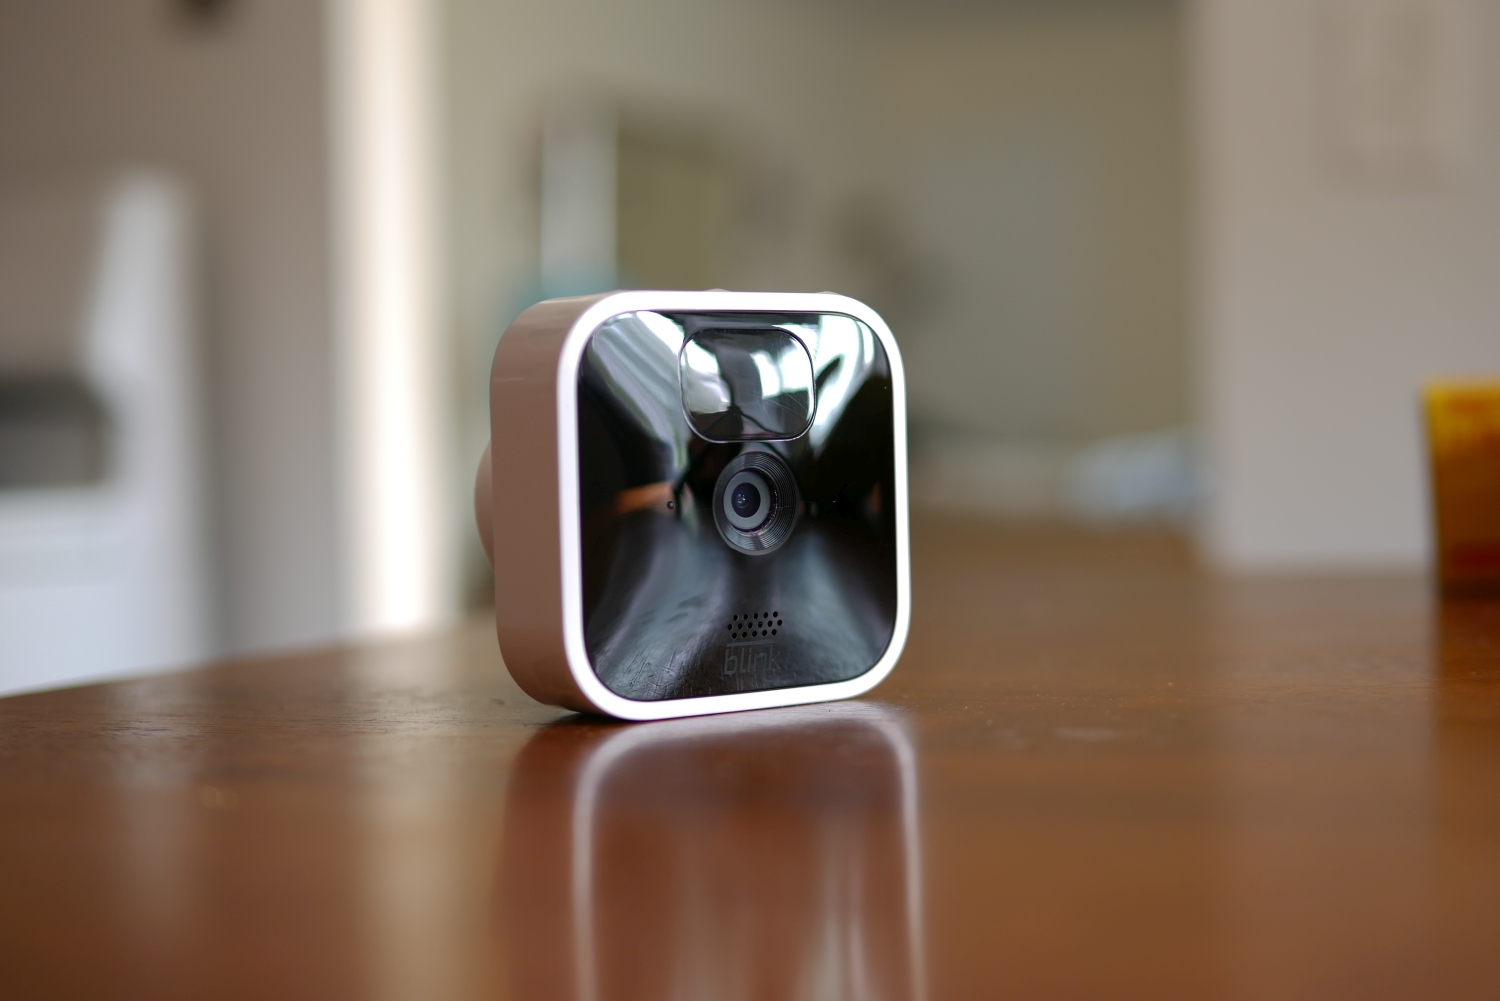 Blink Indoor Wireless Camera REVIEW - Better Than I Expected! 